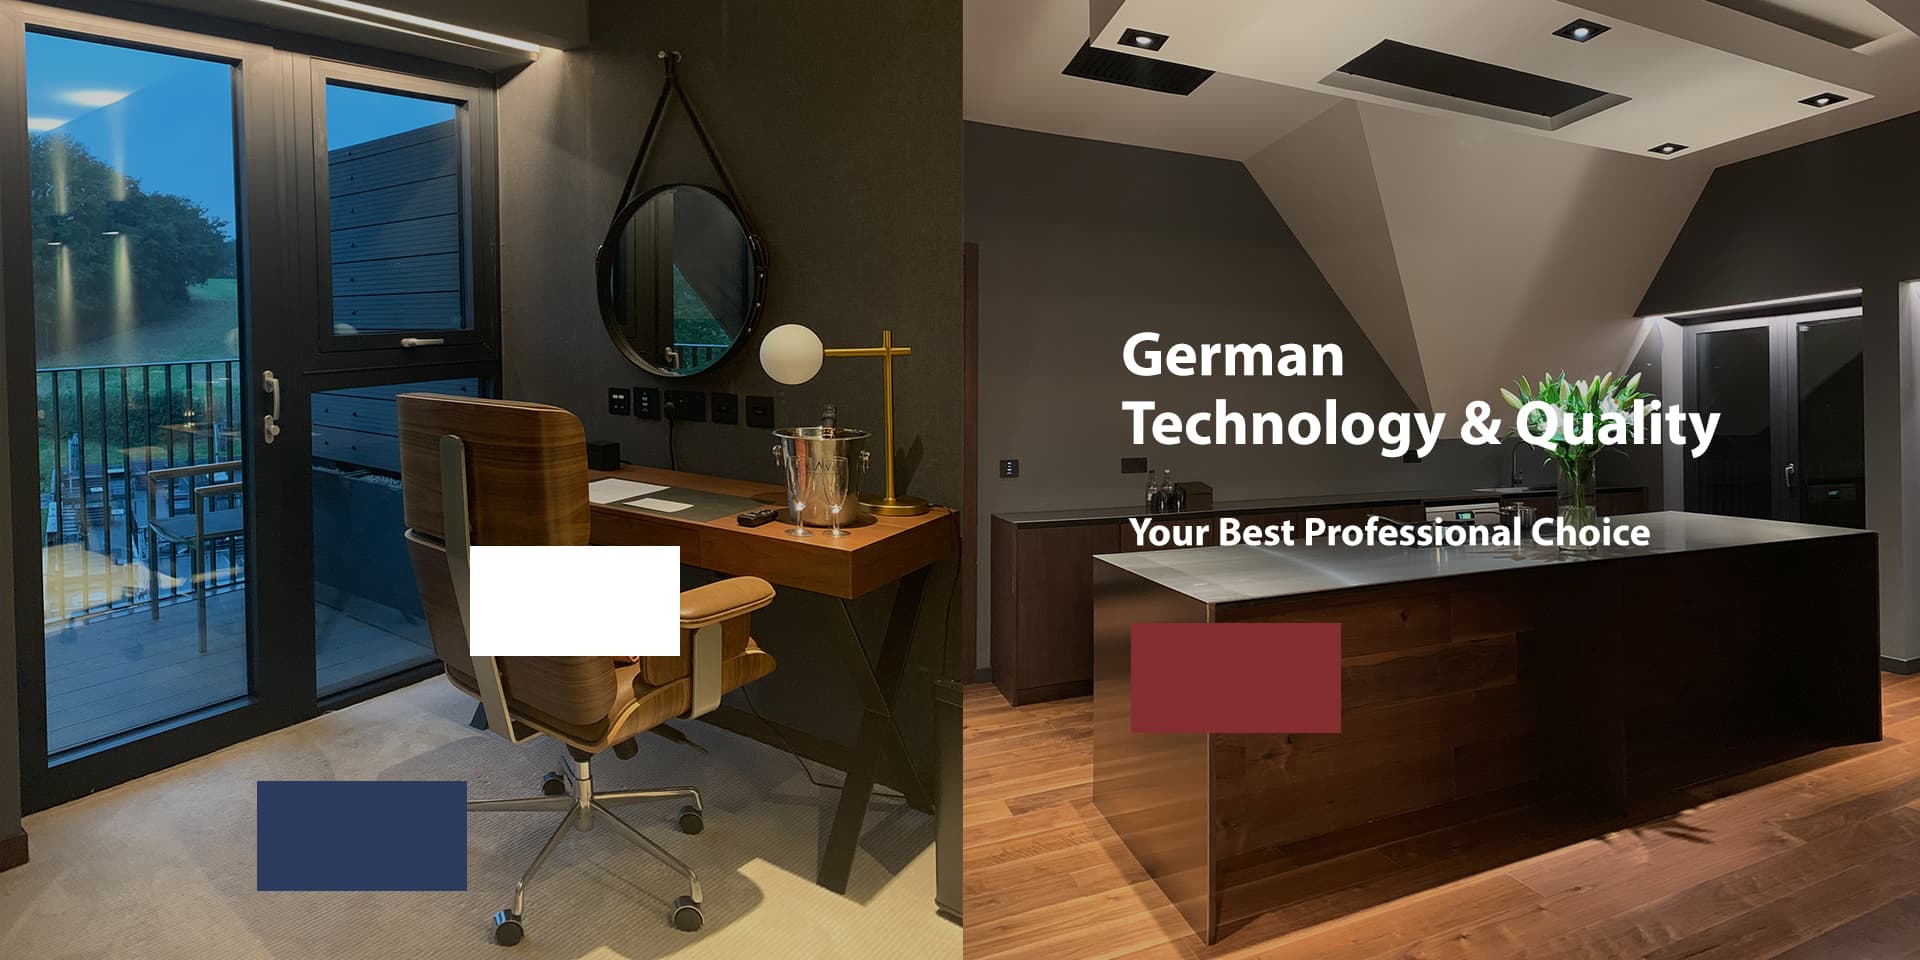 German technology & quality, your best professional choice.